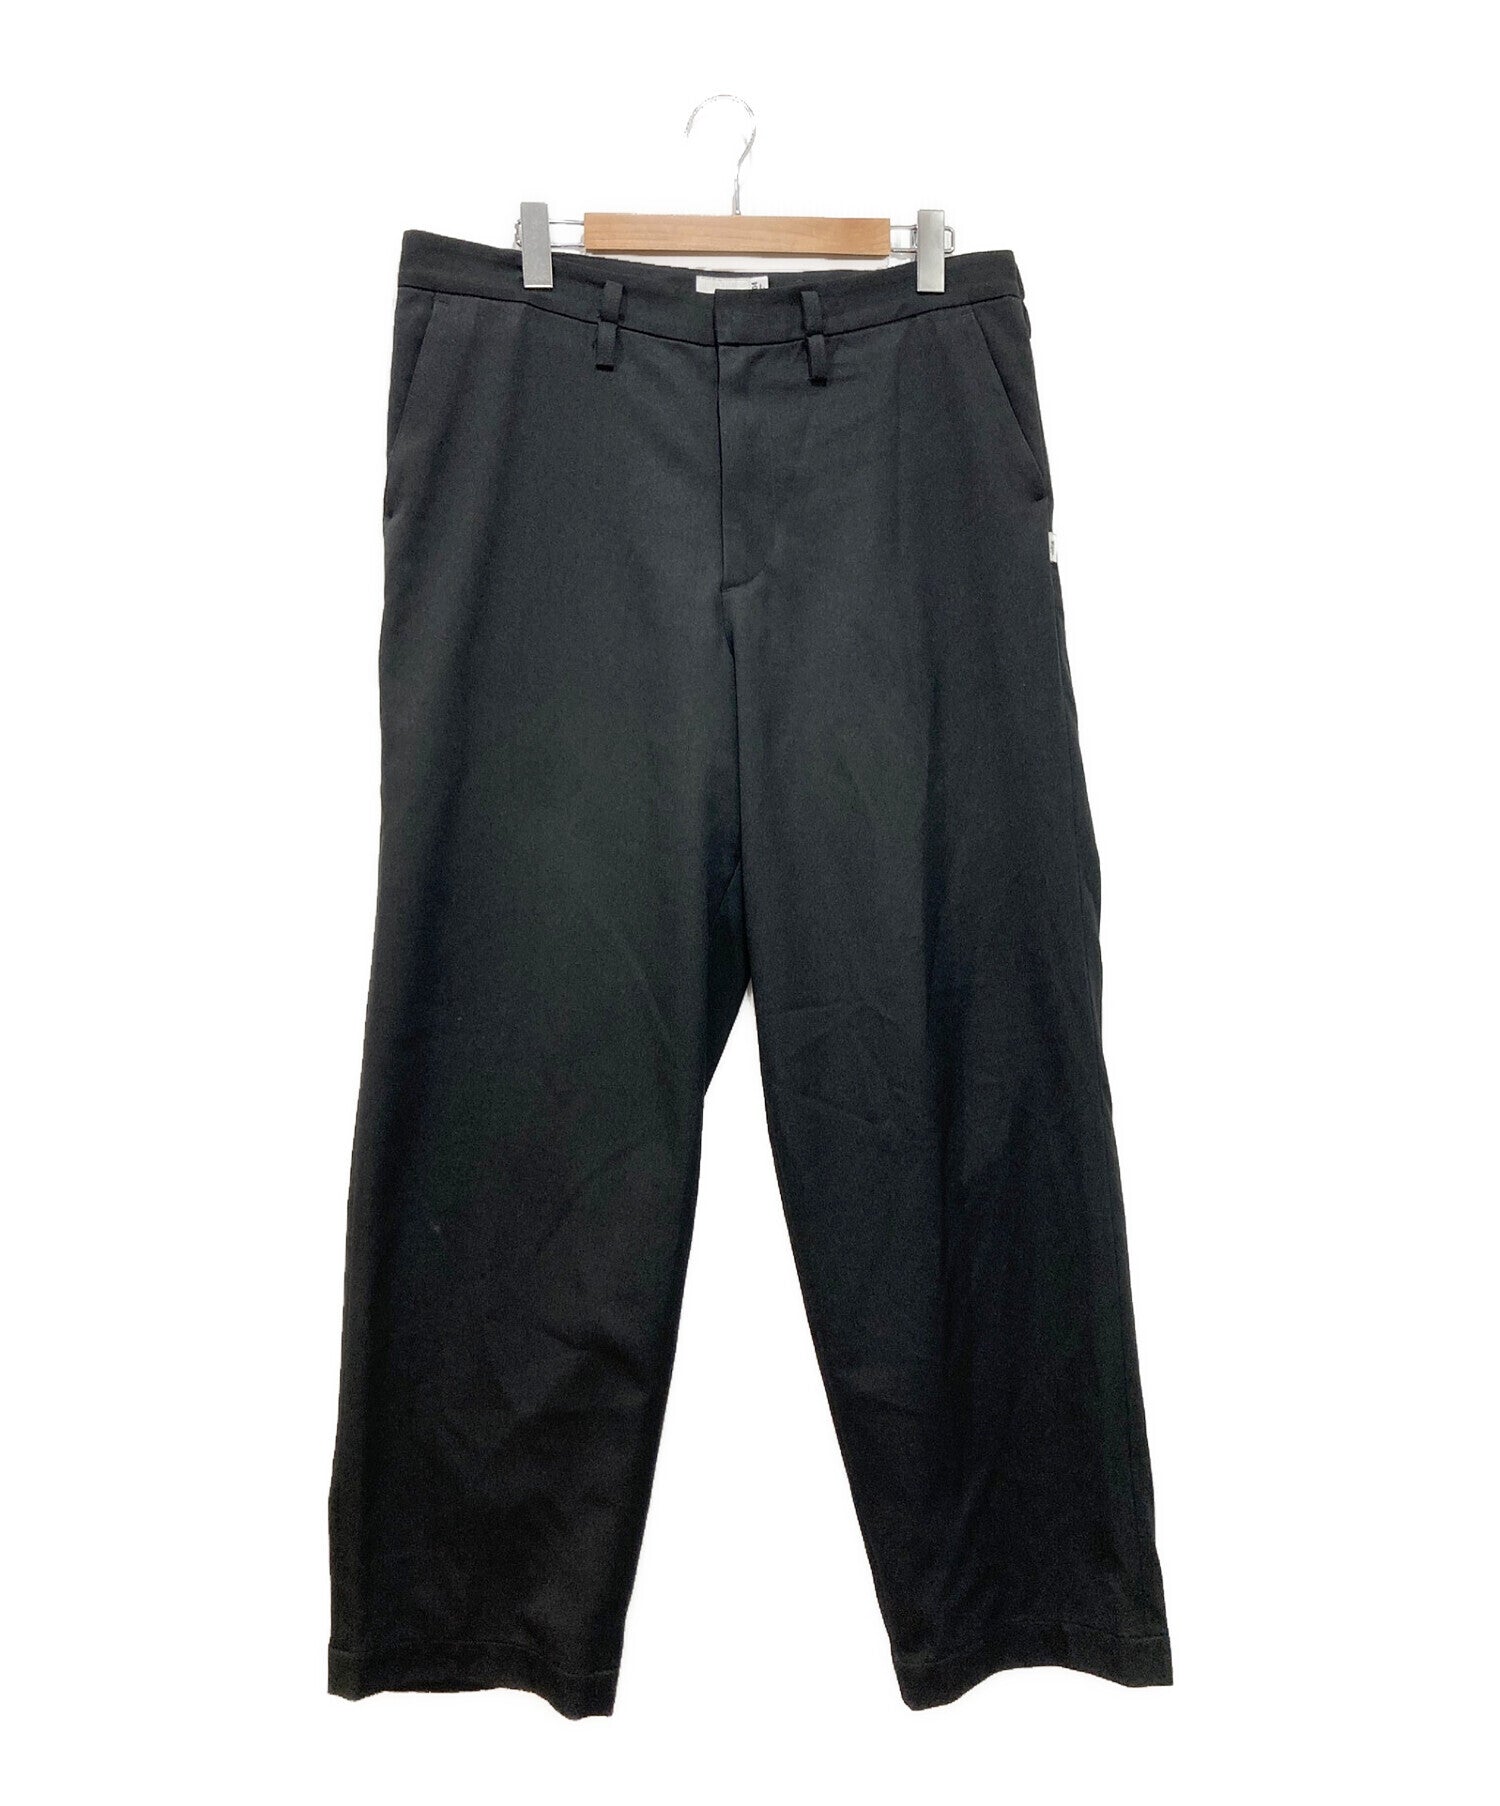 WTAPS CREASE DL / TROUSERS / POLY. TWILL 231TQDT-PTM01